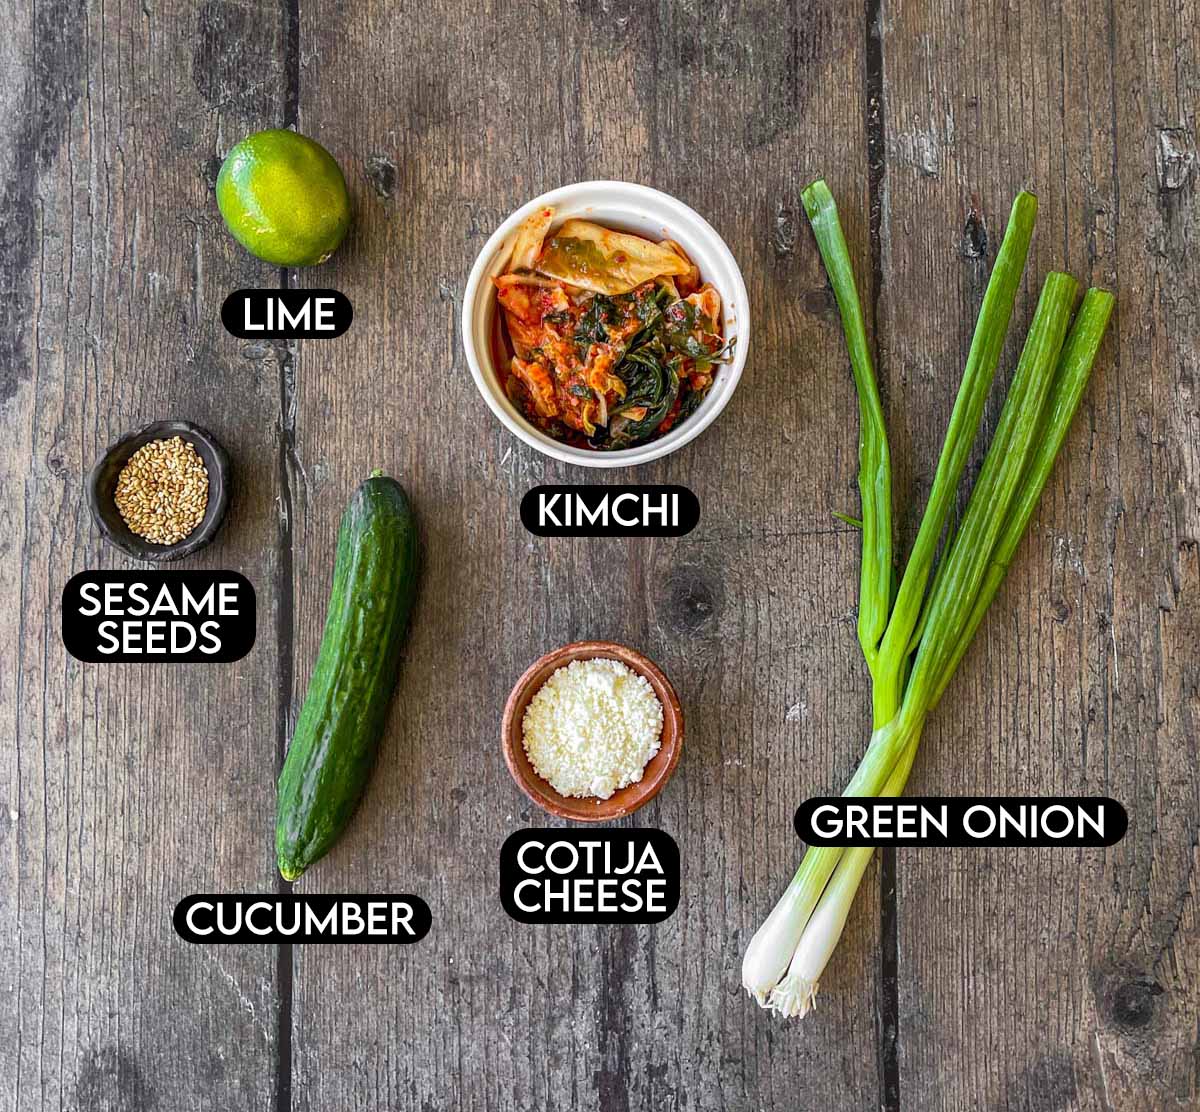 Optional toppings for korean style taccos